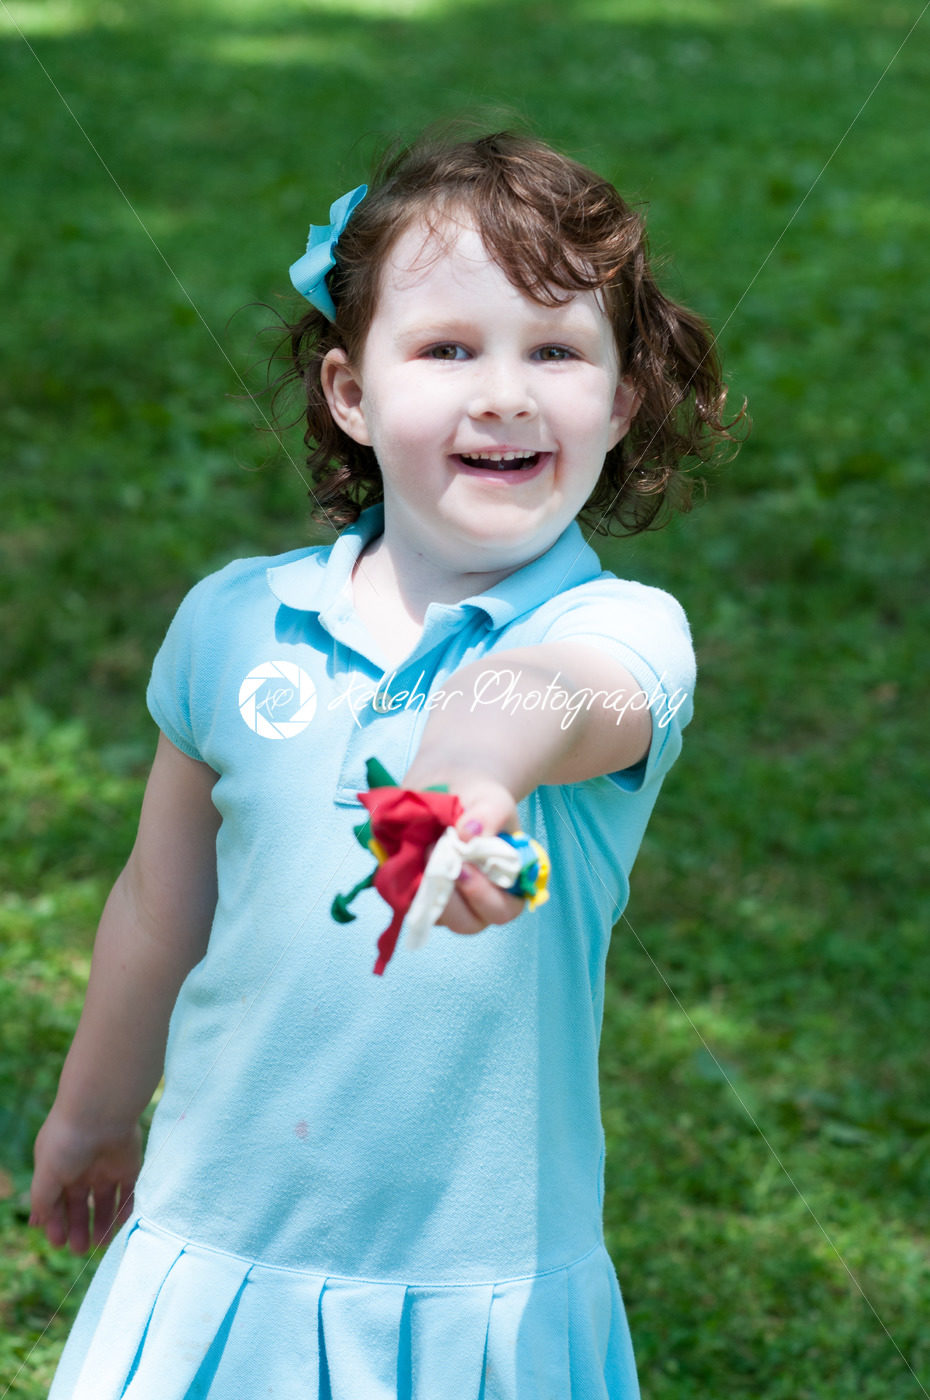 Young girl outside at park holding balloons - Kelleher Photography Store